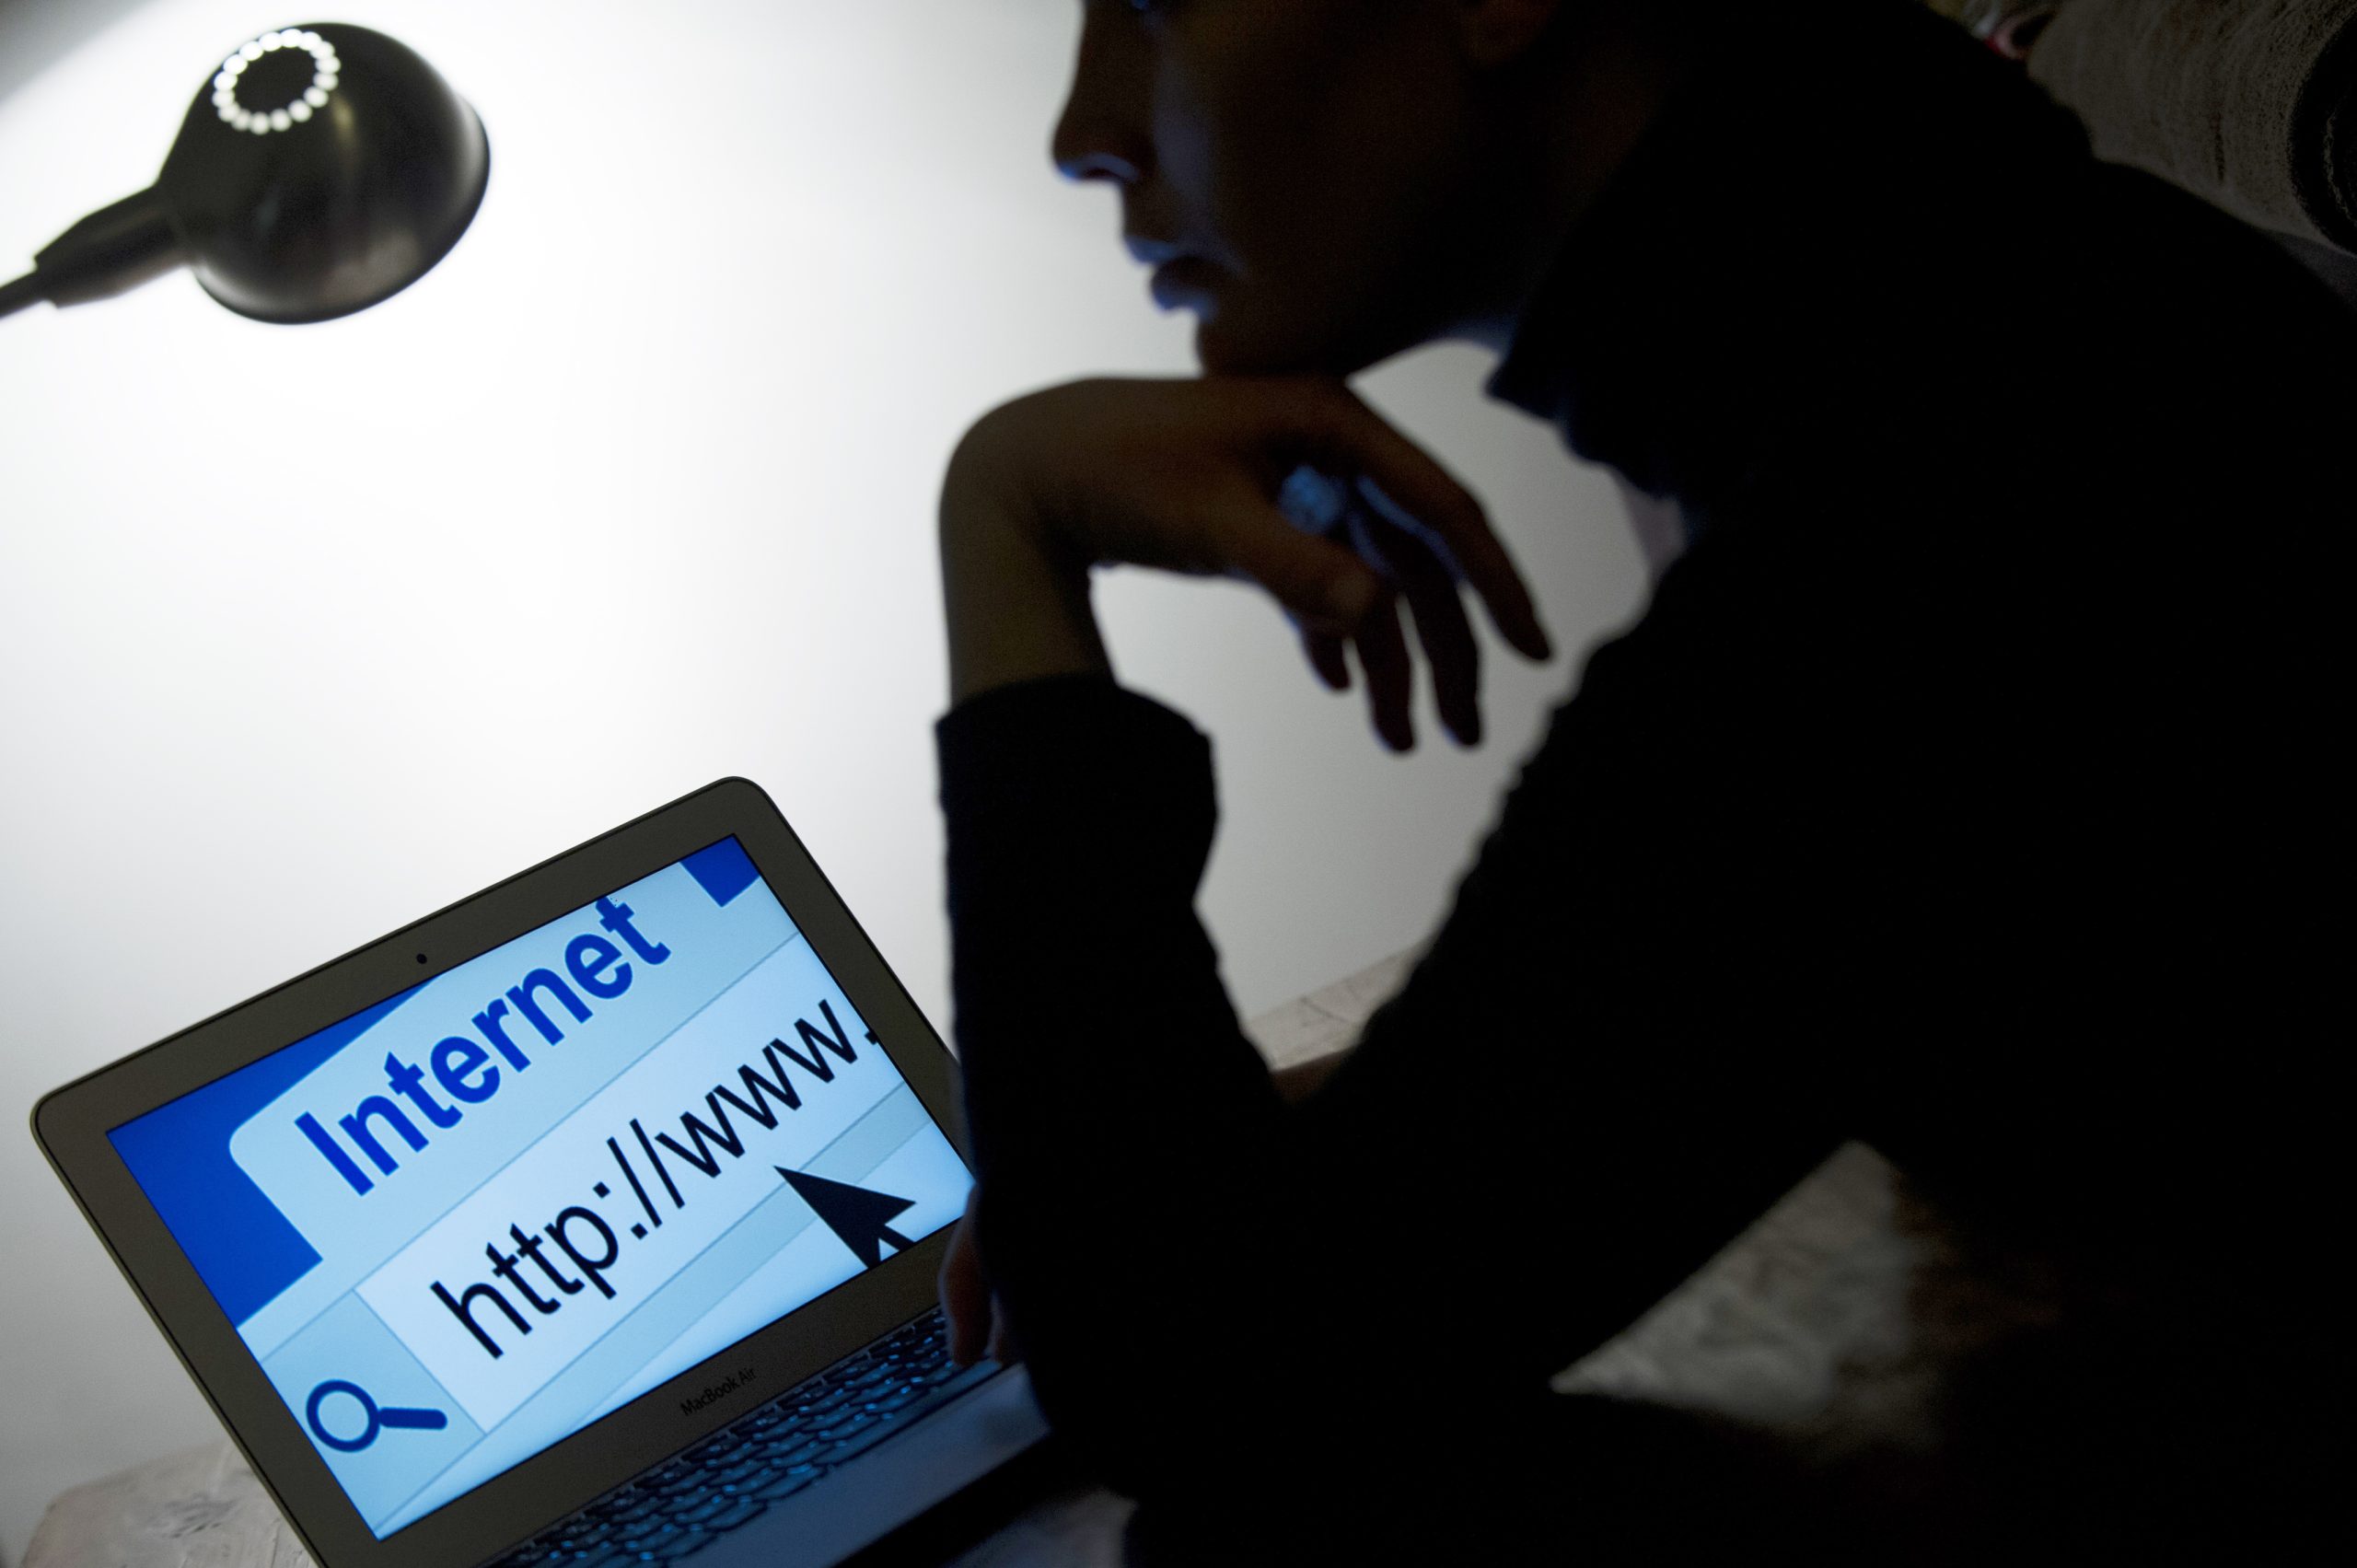 A woman looks at a webpage while connecting on the internet on March 15, 2013 in Paris.    AFP PHOTO / LIONEL BONAVENTURE        (Photo credit should read LIONEL BONAVENTURE/AFP/Getty Images)